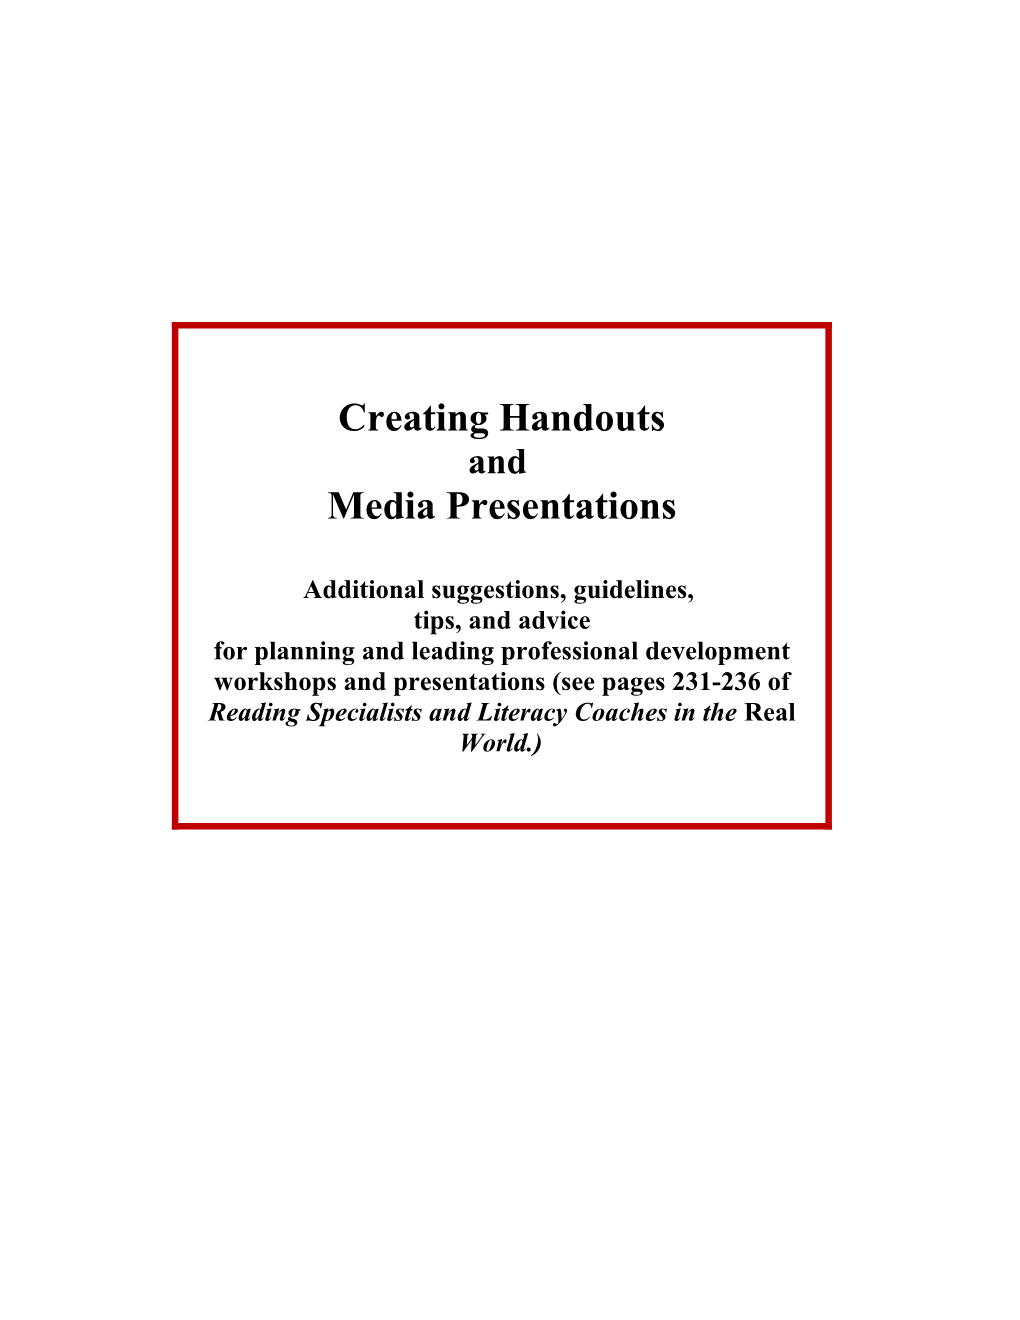 Chapter 11: Creating Handouts and Media Presentations